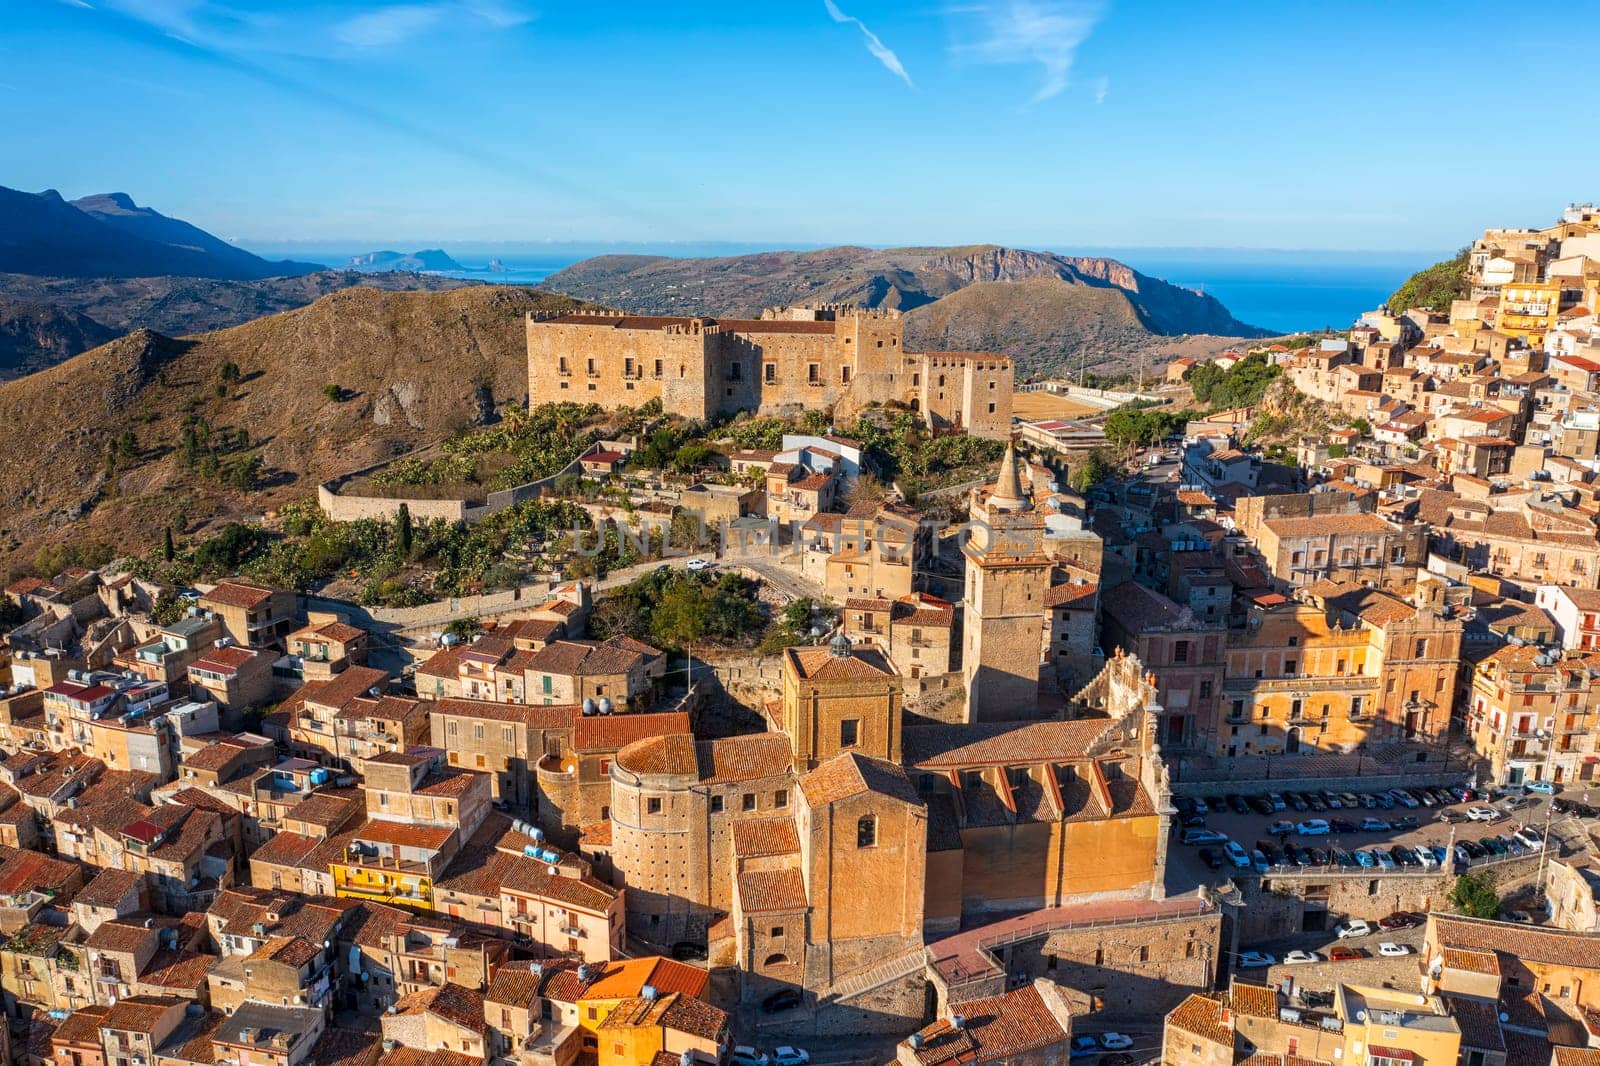 Caccamo, Sicily, Italy. View of popular hilltop medieval town with impressive Norman castle and big cathedral